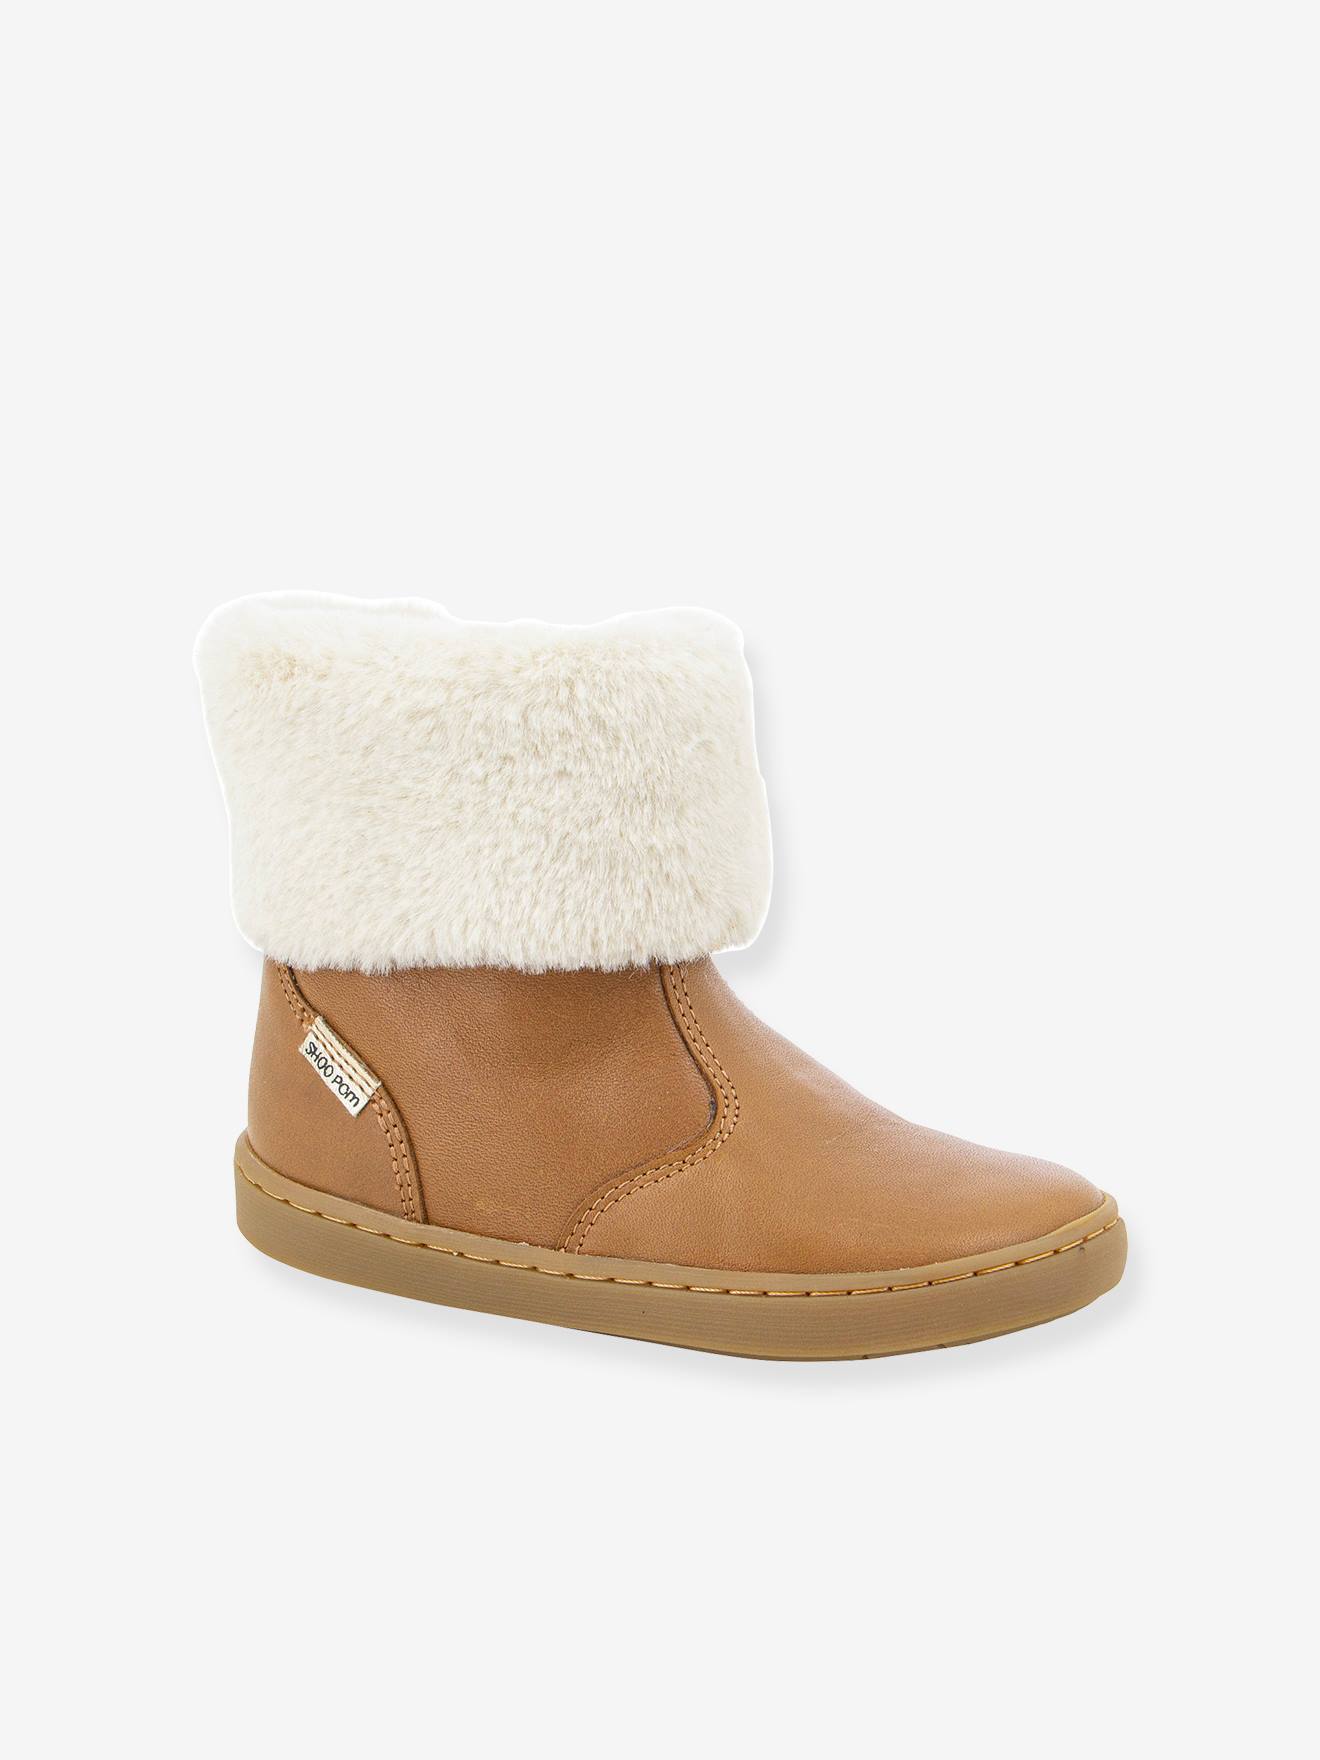 Play Boots Fur for Babies, by SHOO POM(r) camel